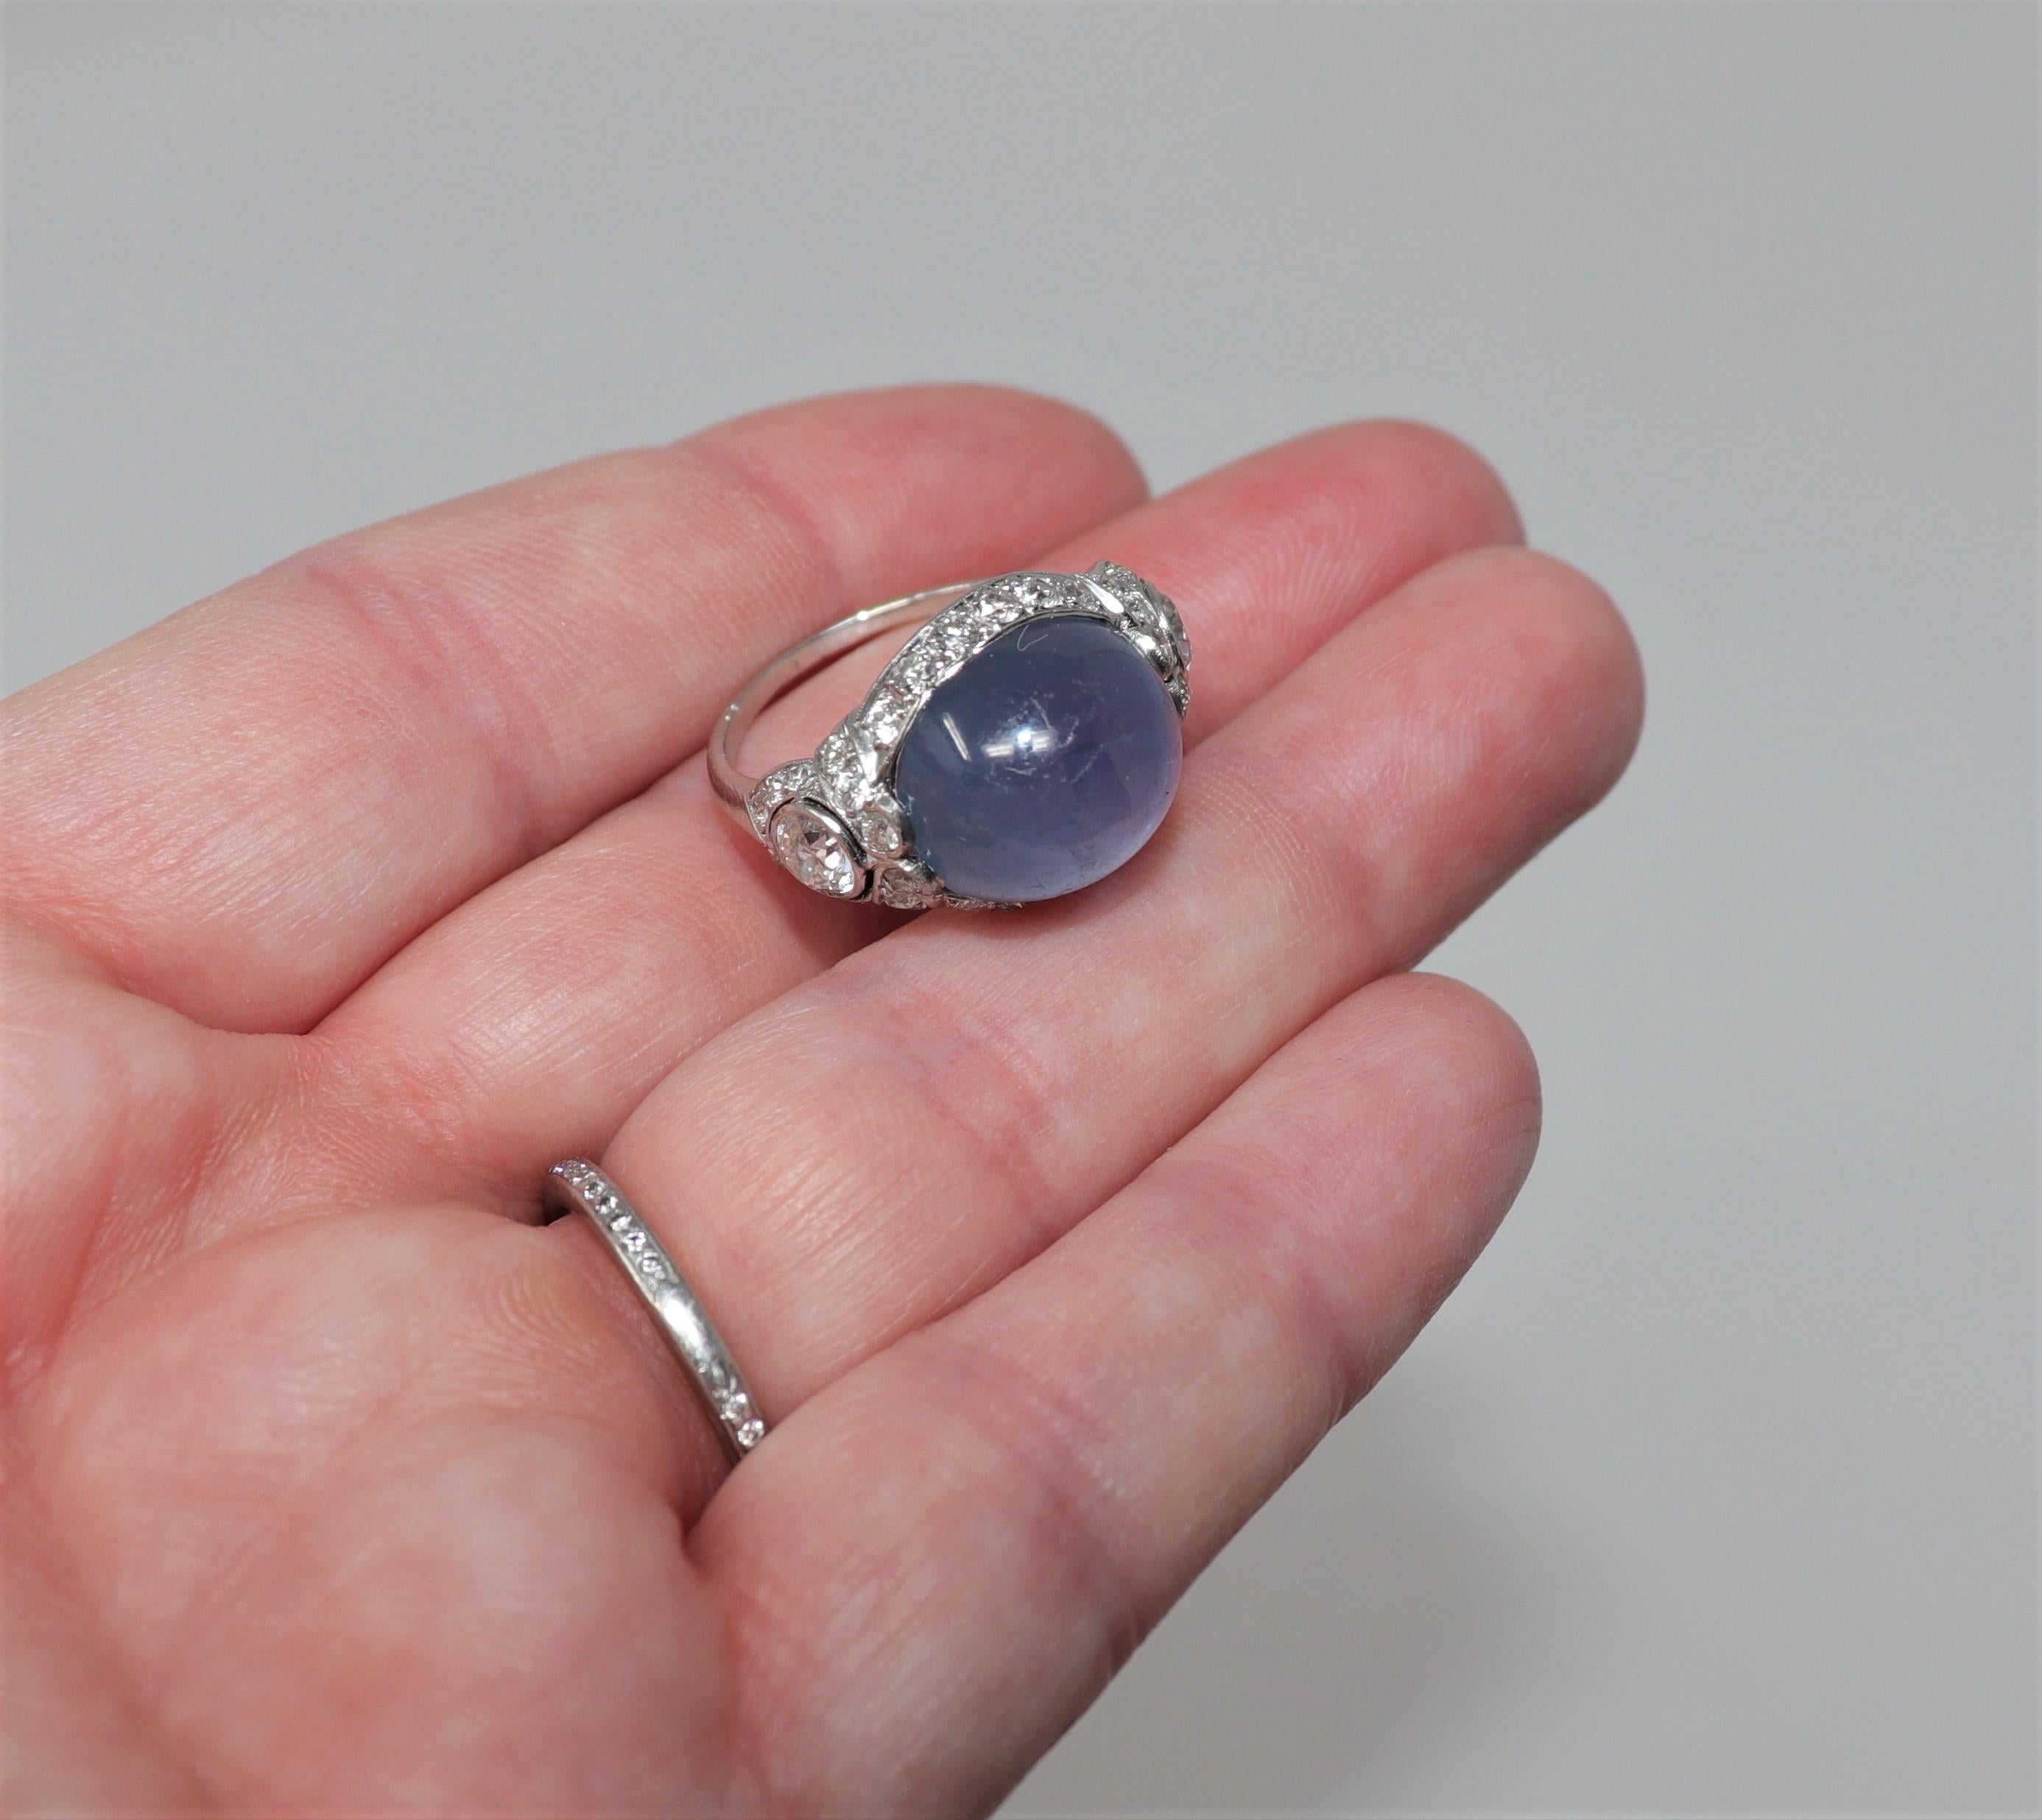 Women's Oval Cabochon Star Sapphire and Diamond Ring in Platinum 15.4 Carats Total For Sale